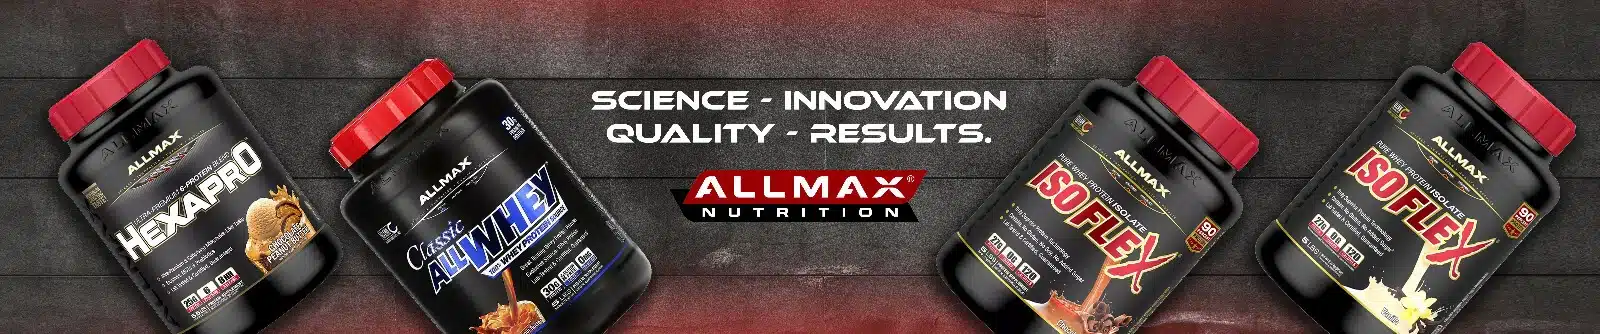 allmax classic all whey 100% whey protein source